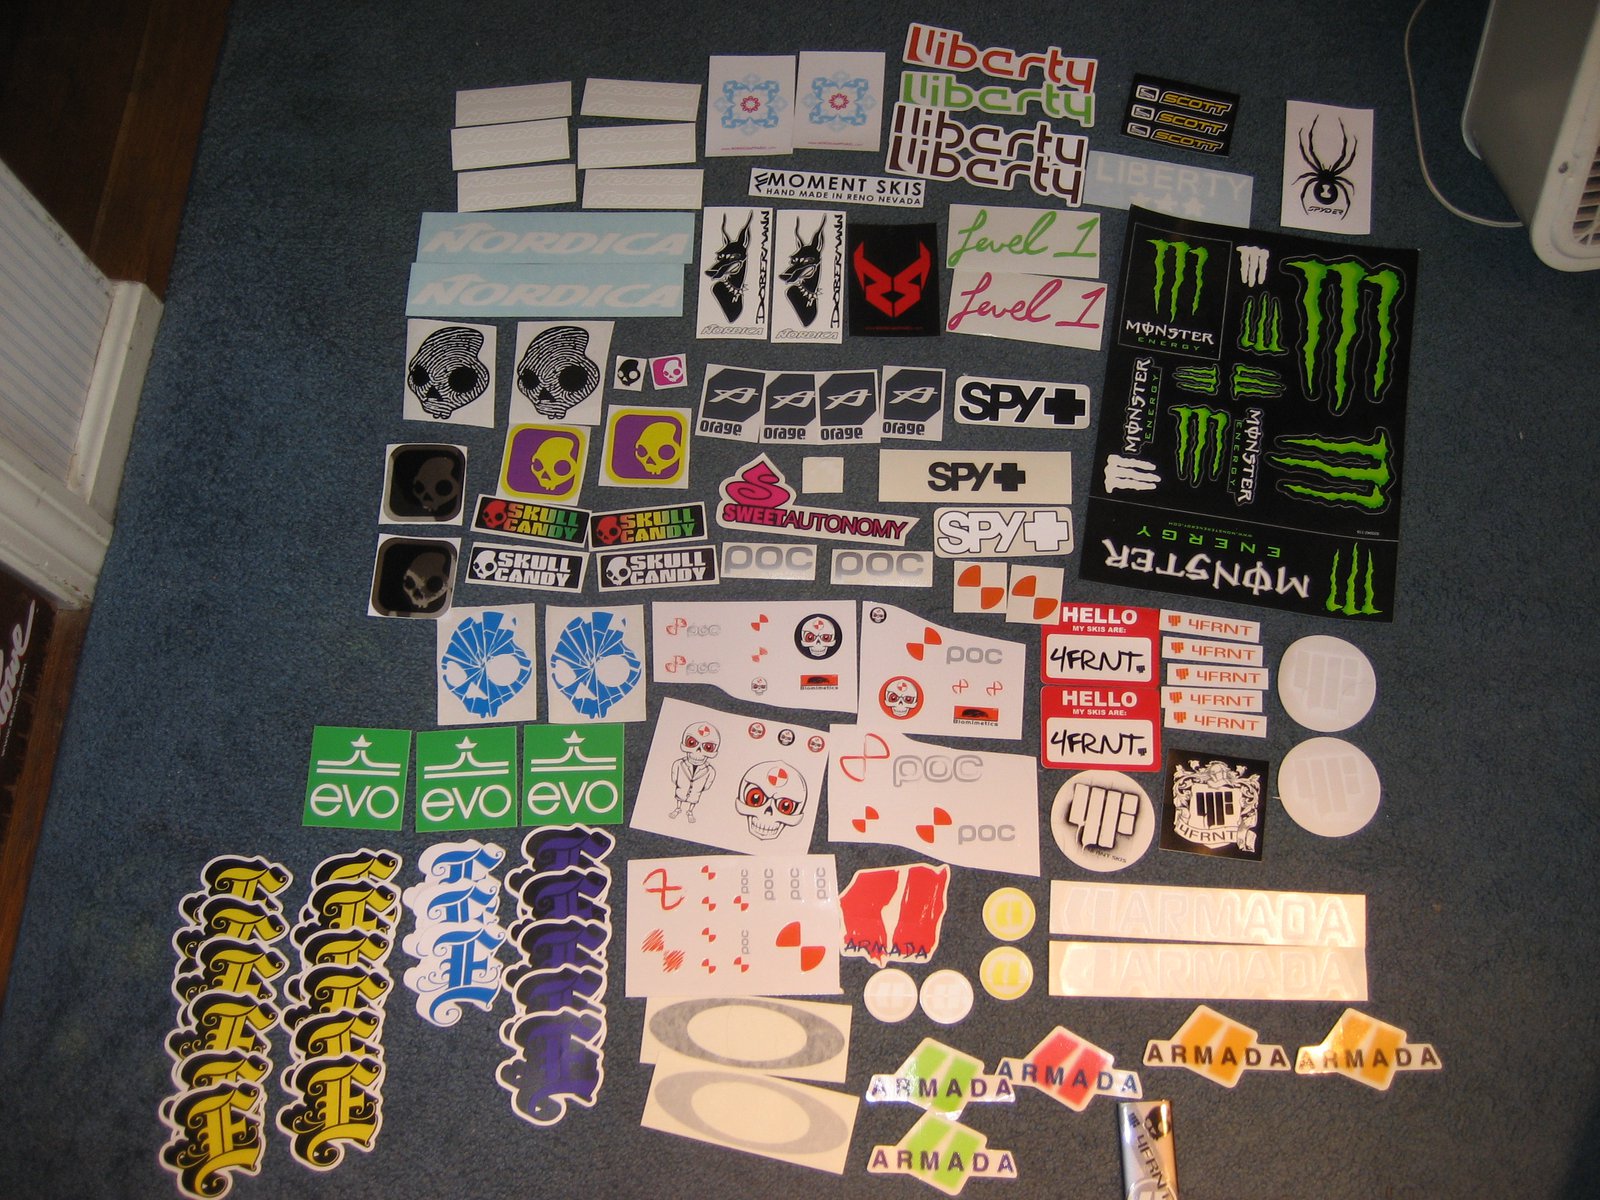 All stickers 6/11/09 - 1 of 2